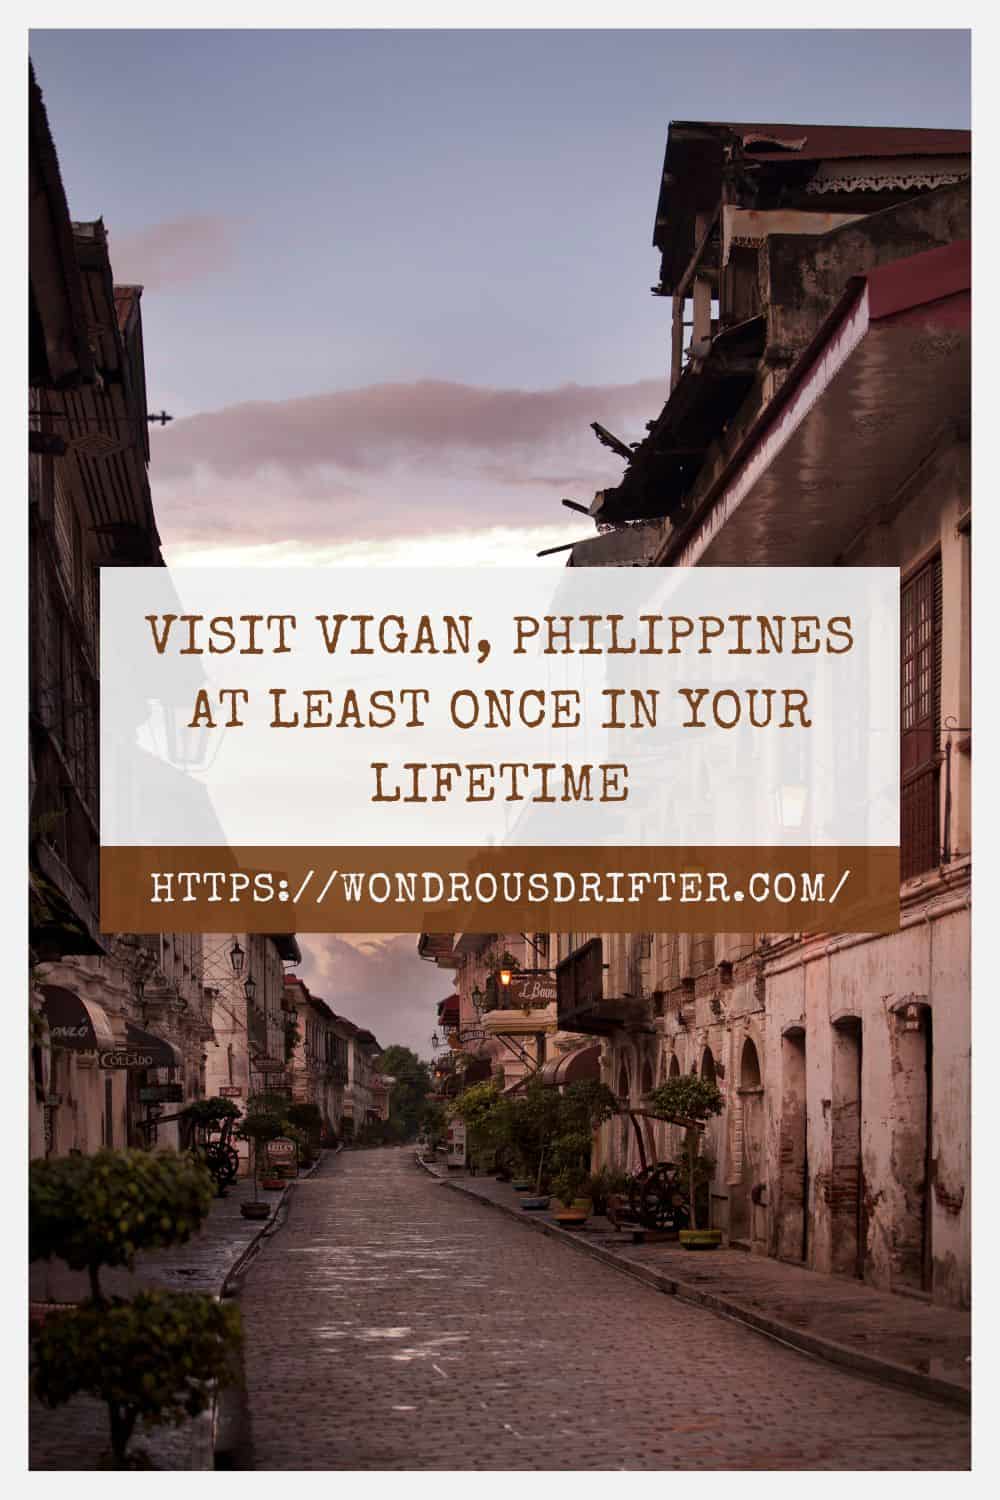 Visit Vigan Philippines at least once in your lifetime